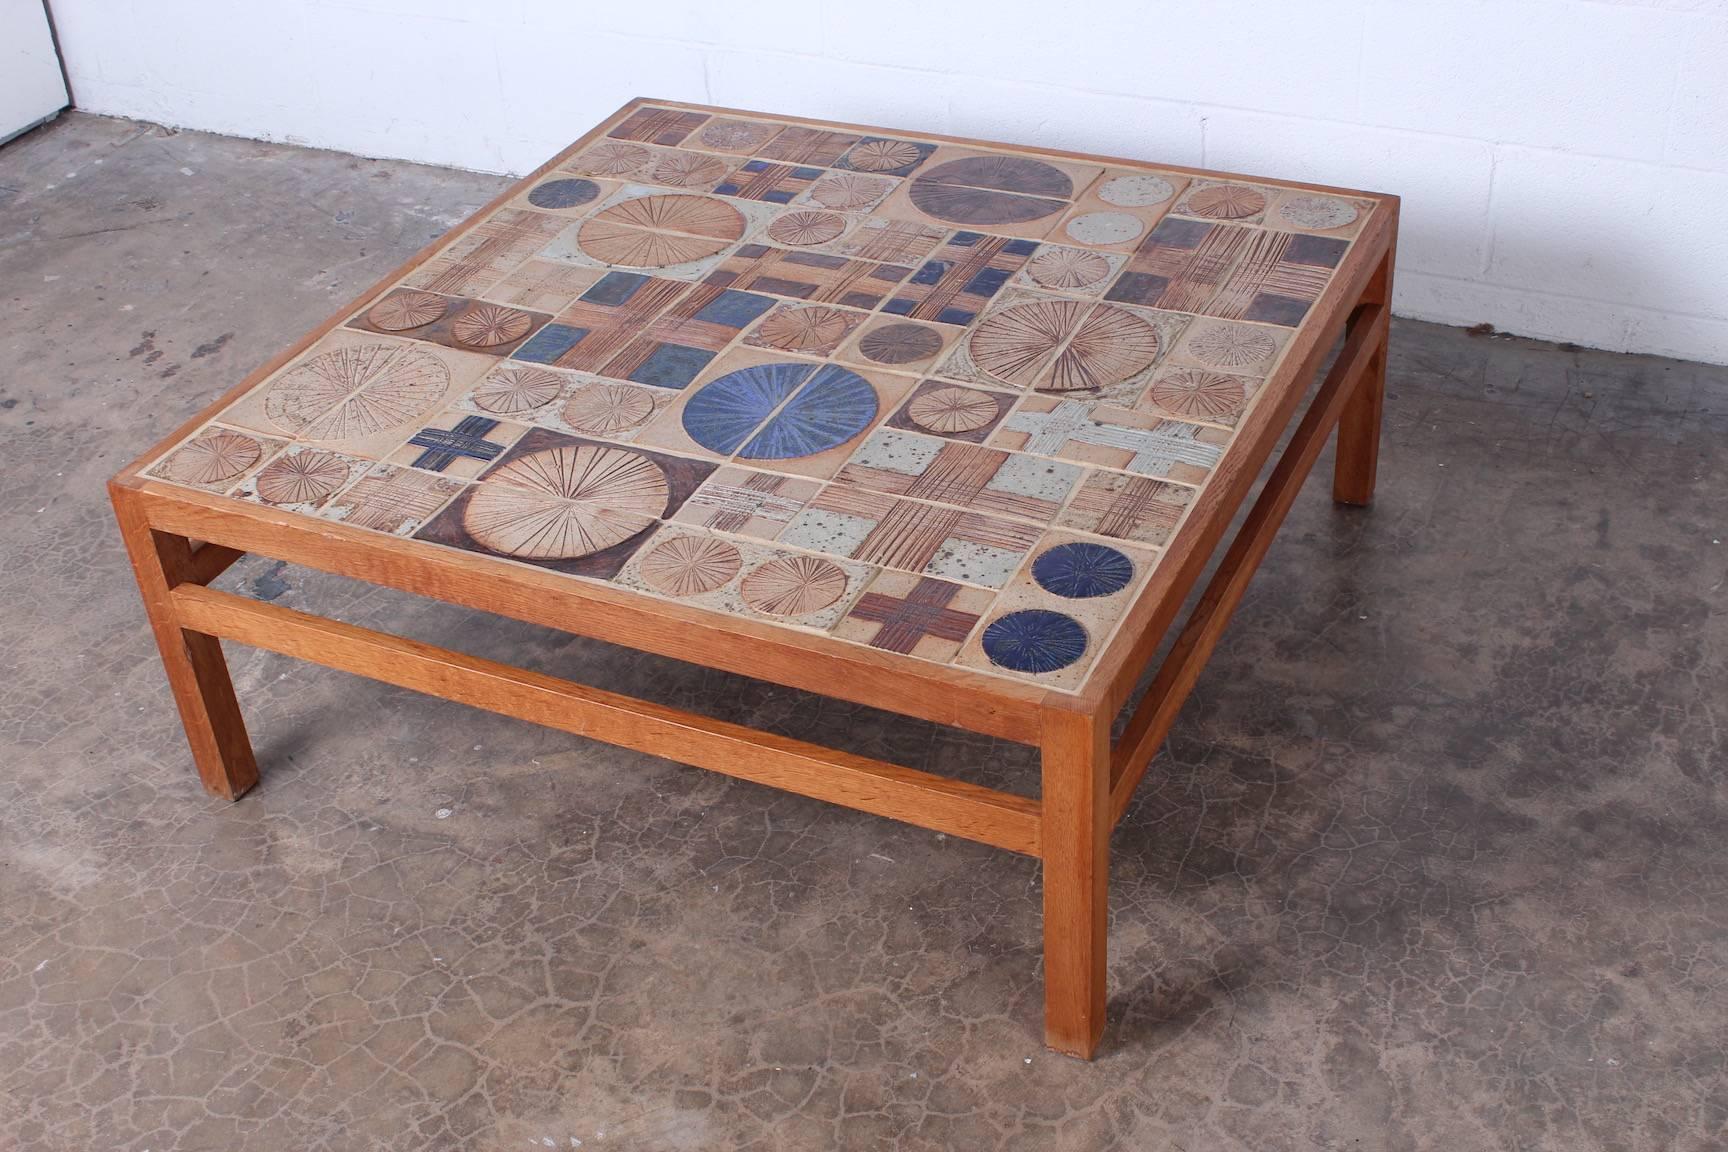 Mid-20th Century Coffee Table with Ceramic Tiles by Tue Poulsen & Willy Beck